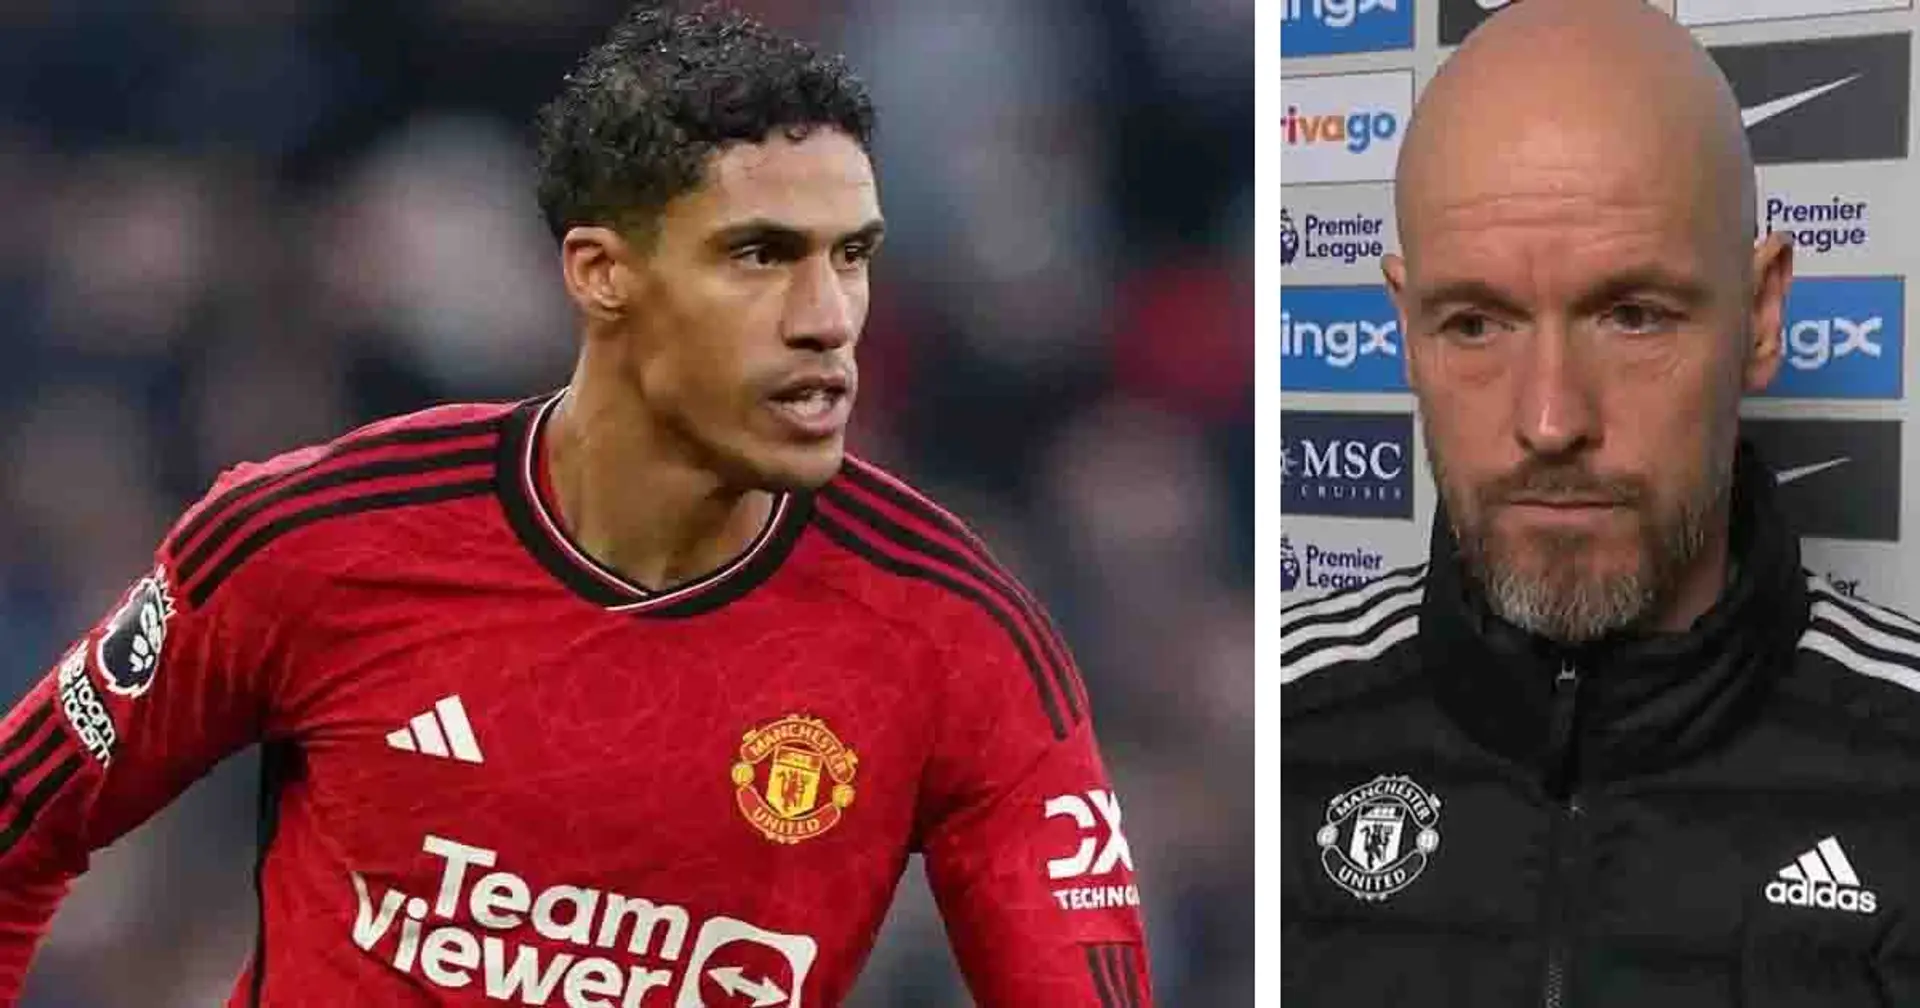 Ten Hag: 'Don't know if Varane and Evans will play against Liverpool'